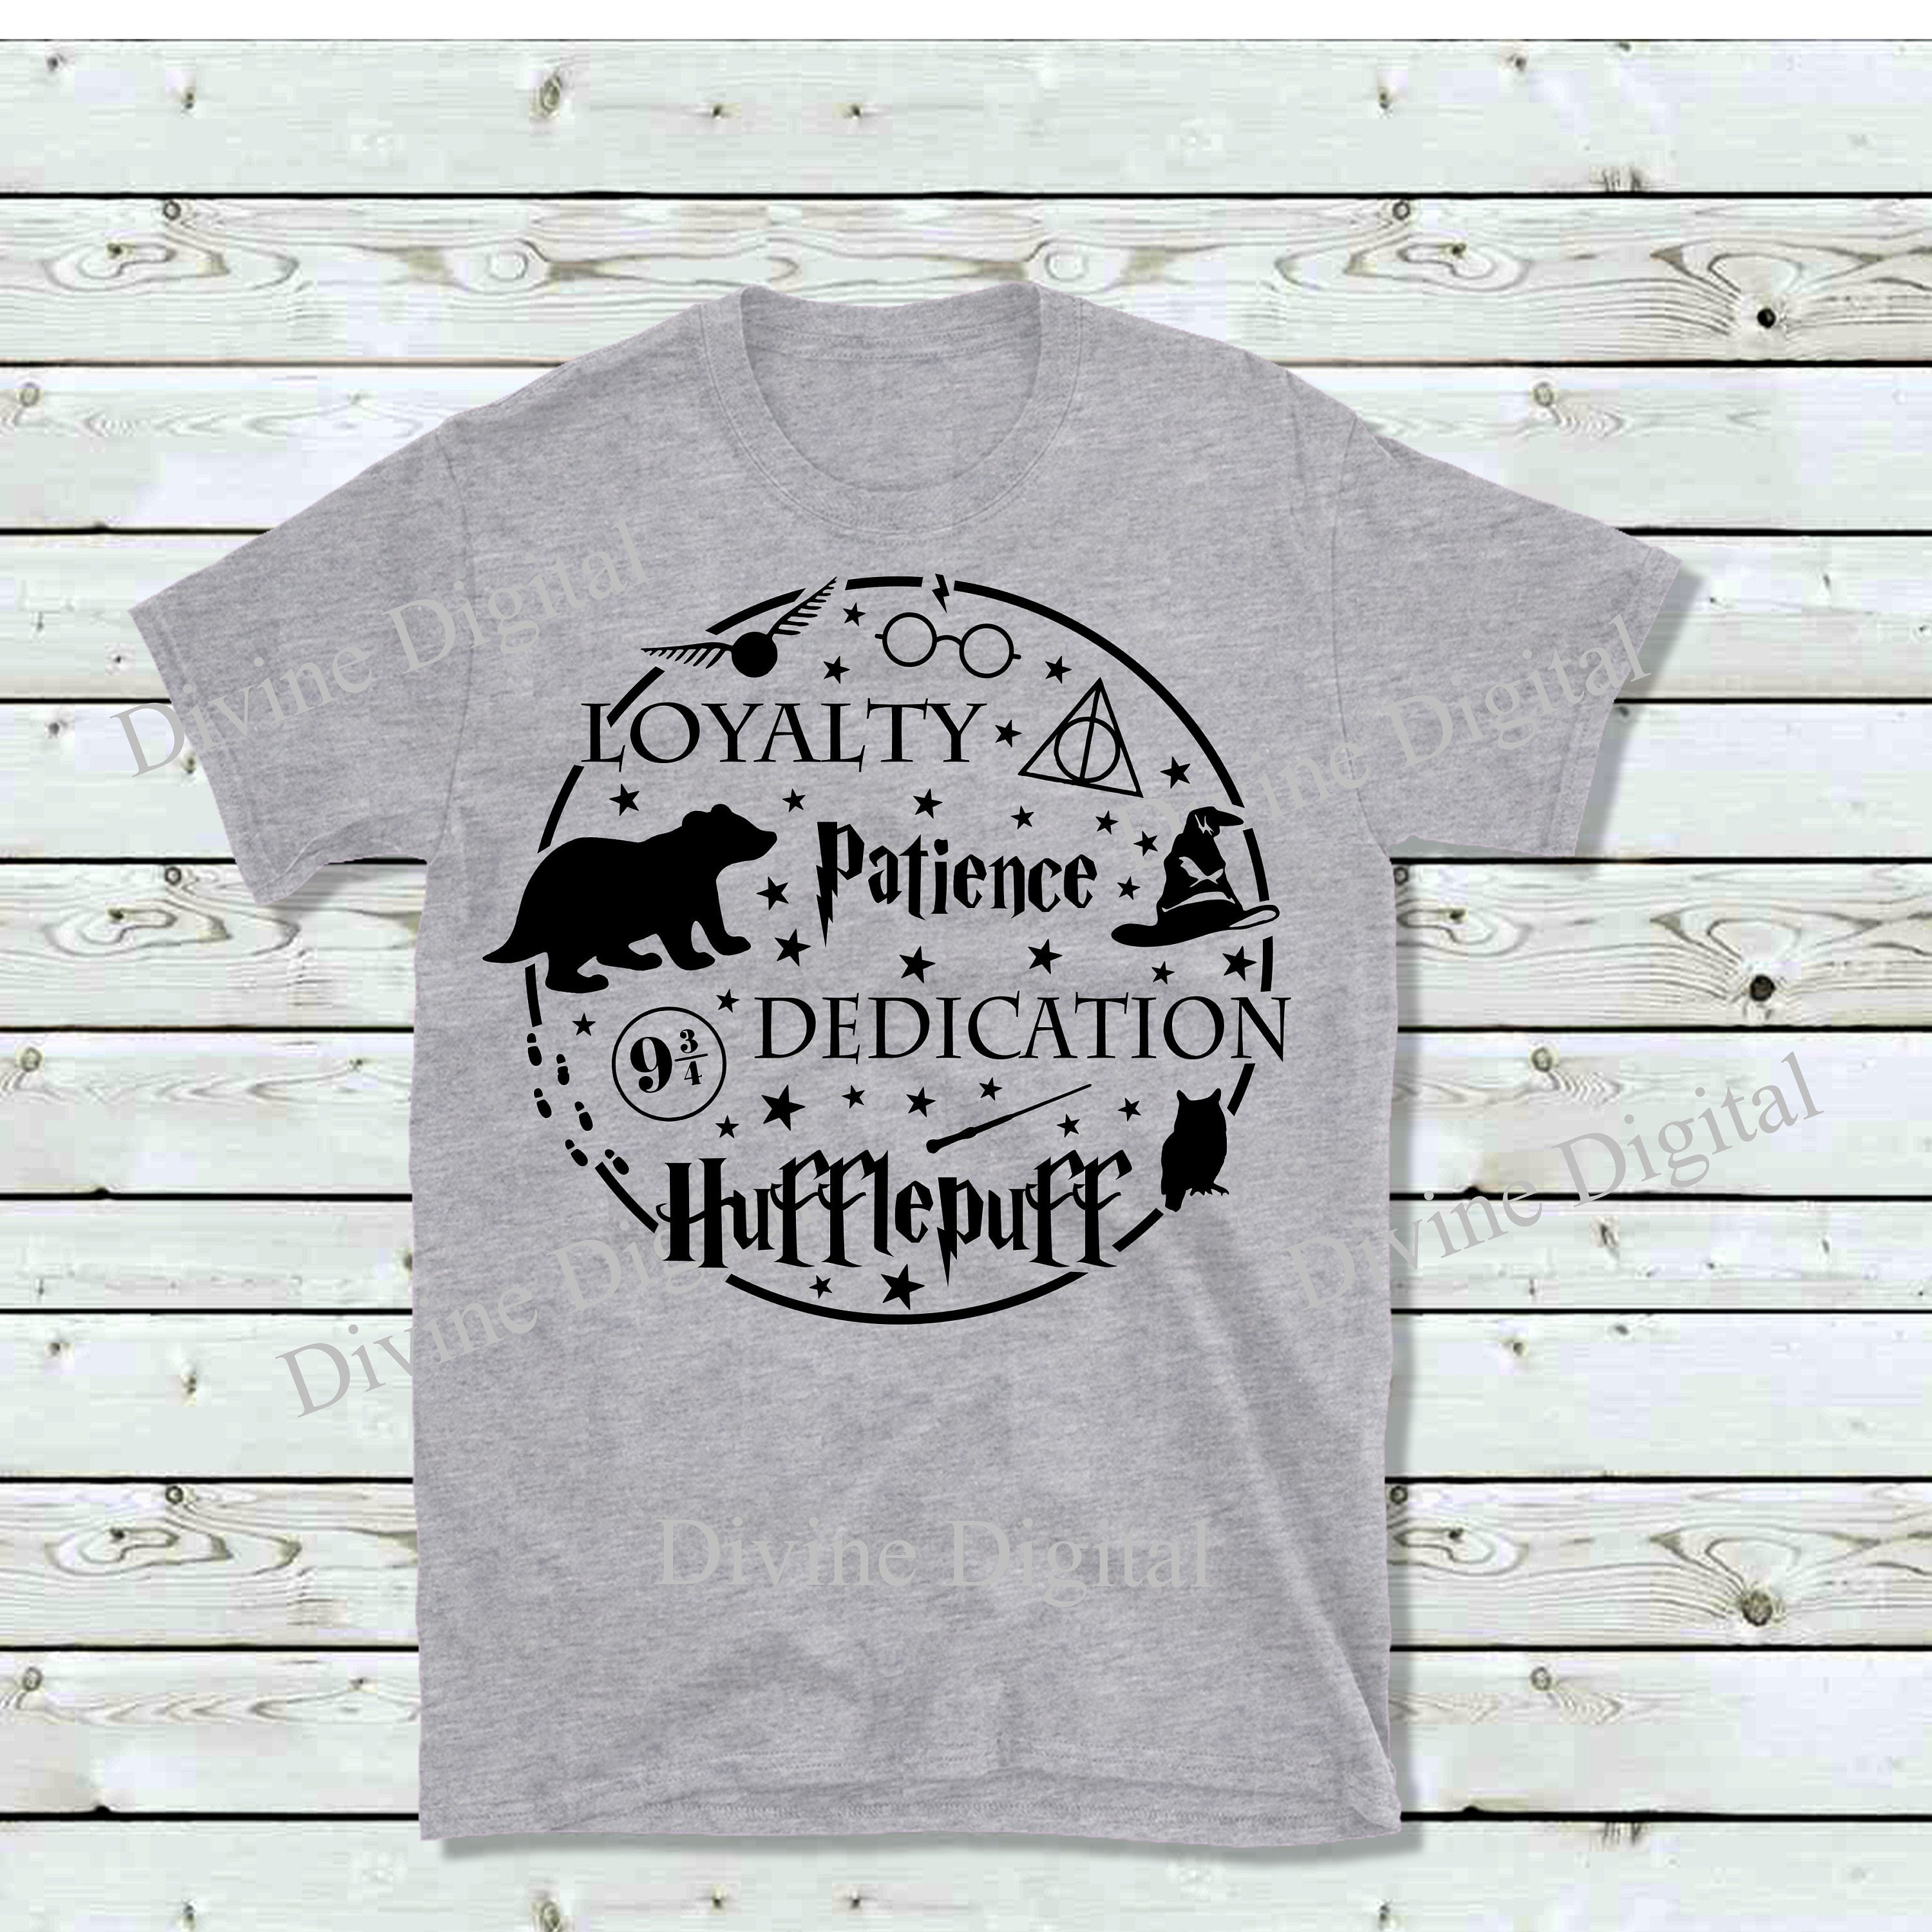 Machines Silhouette Cricut Etsy Word Shirt Vinyl Brother Houses Cut - N for Cutting Bubble File Hufflepuff Scan SVG HP